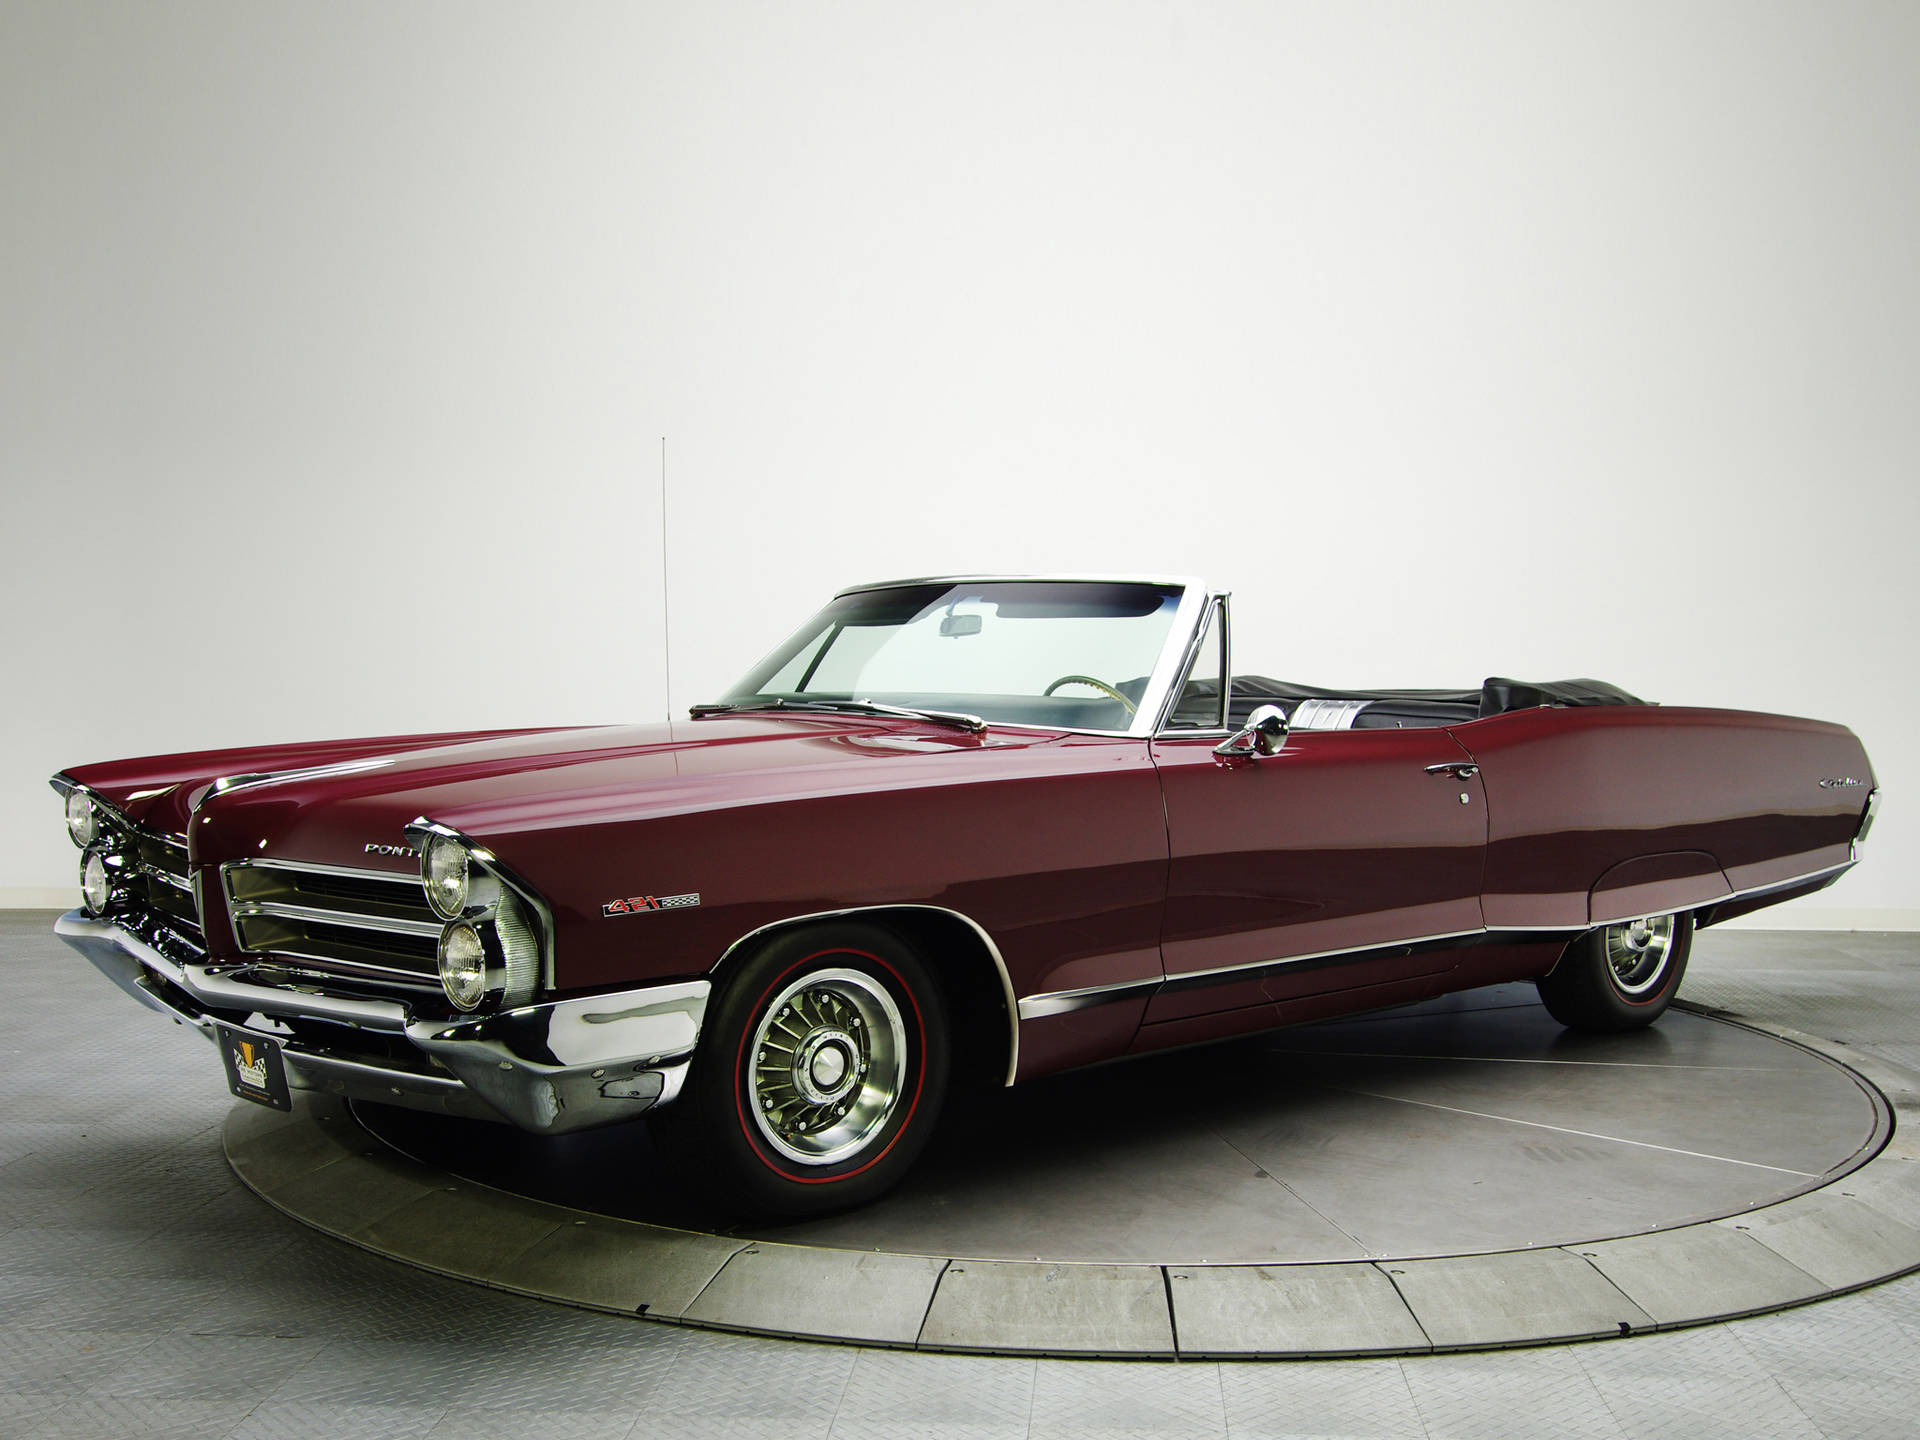 Maroonpontiac Catalina Can Be Translated To Spanish As 